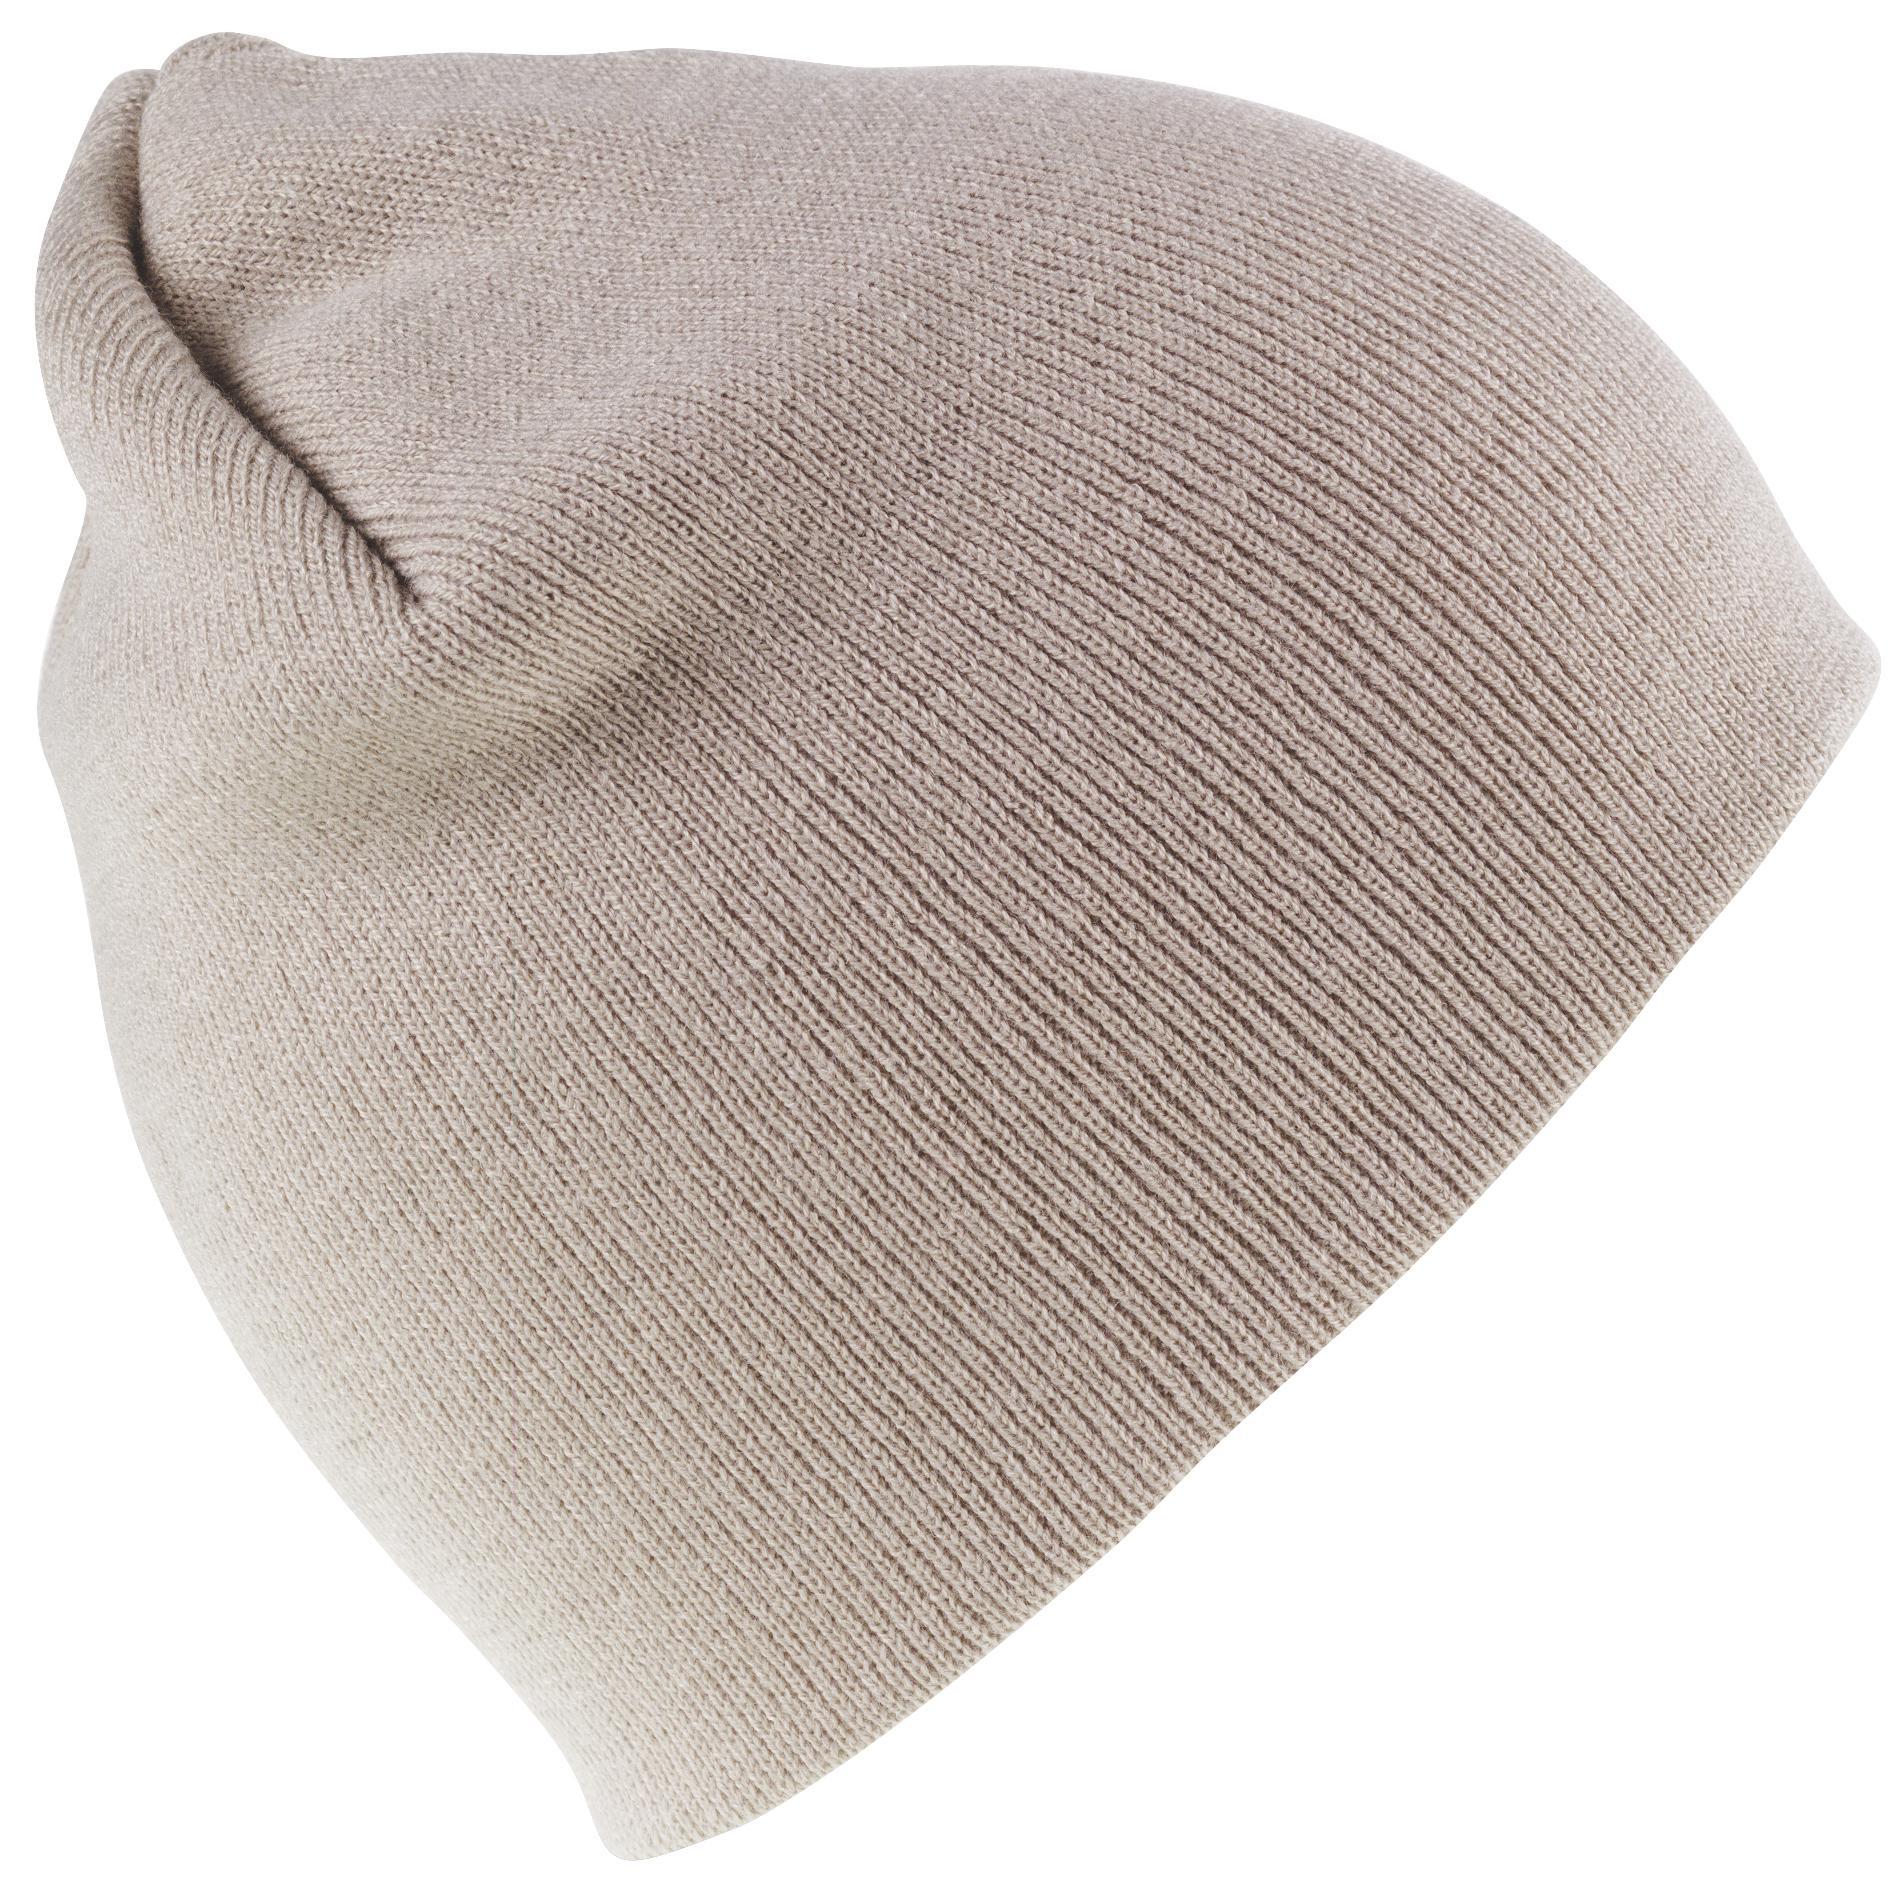 Result Pull On Soft Feel Acrylic Winter Hat (Stone) (One Size)